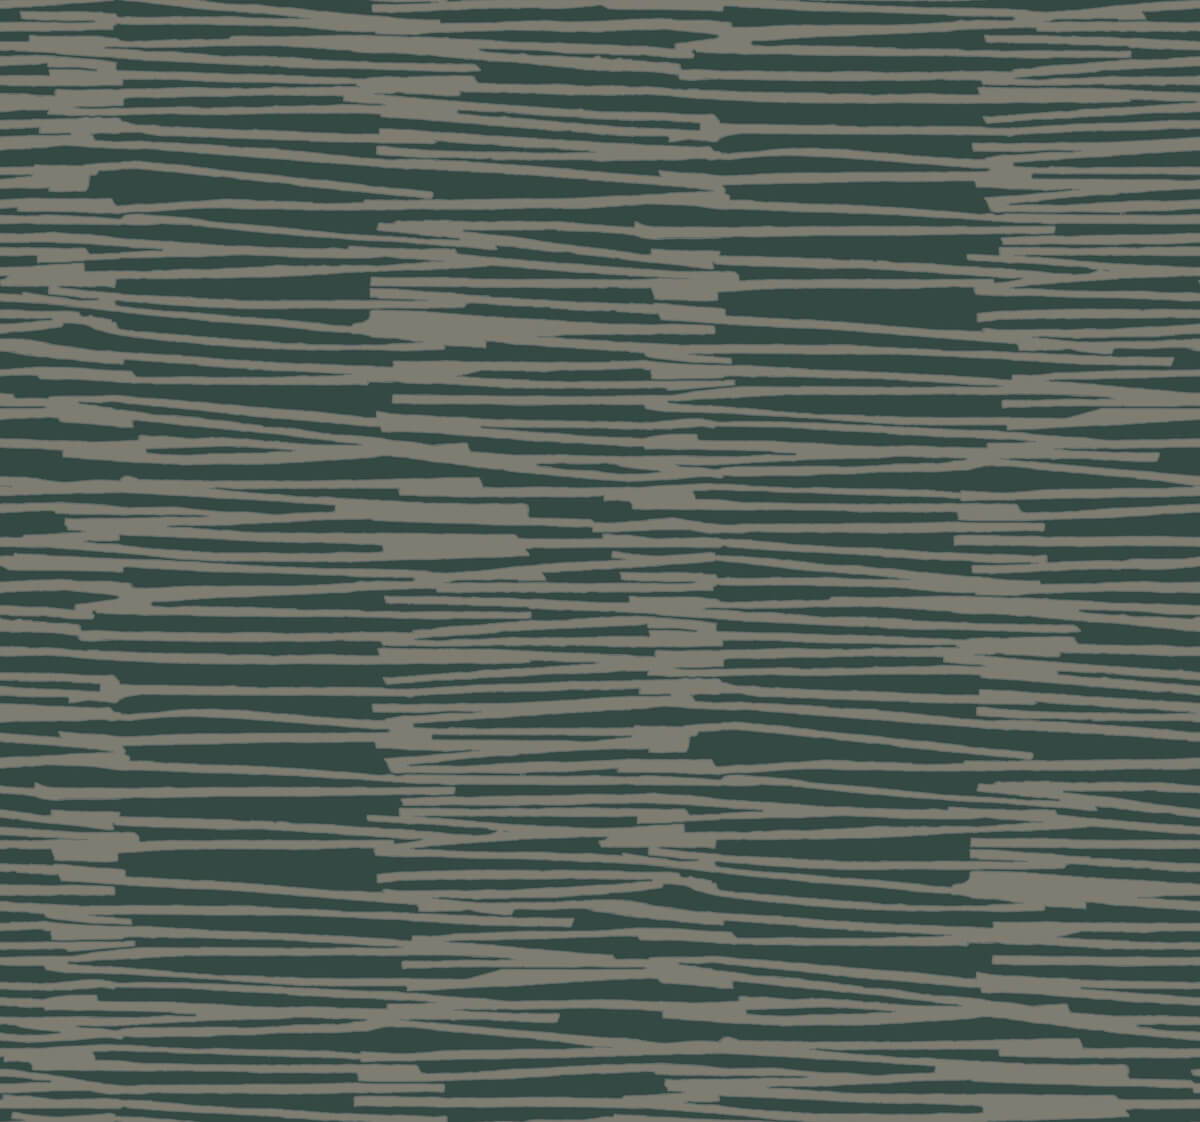 Artistic Abstracts Water Reed Thatch Wallpaper - Green